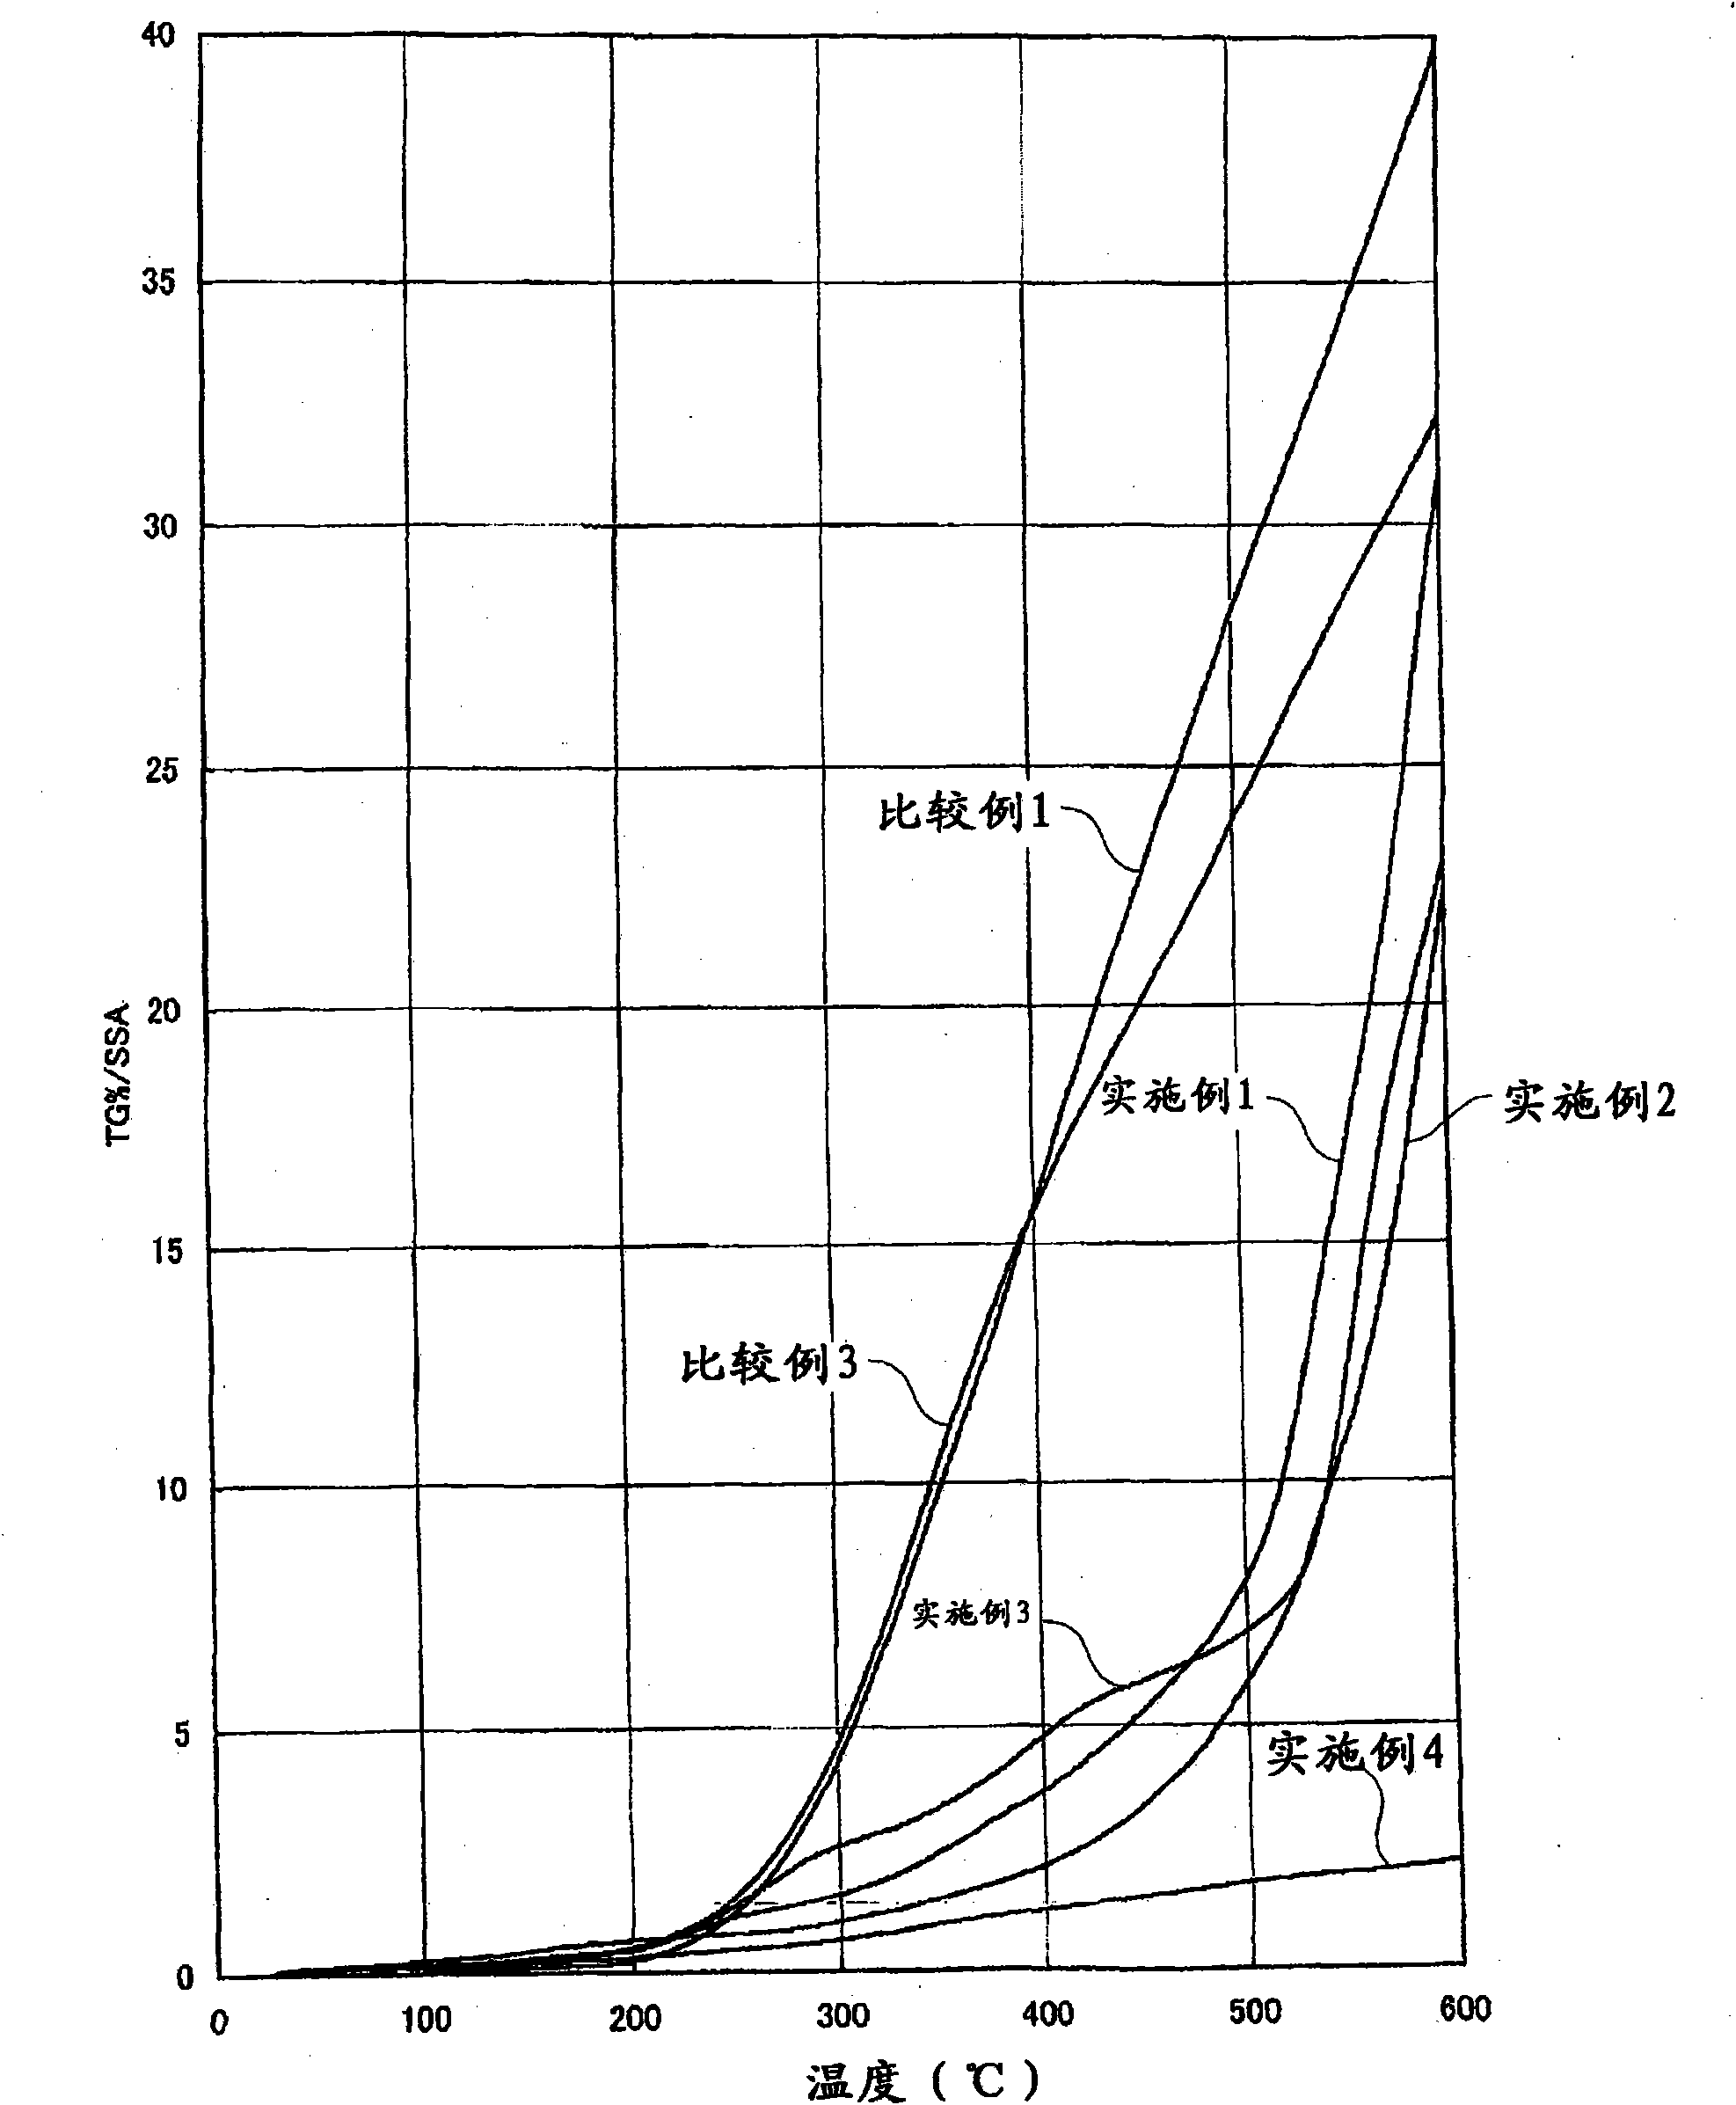 Copper powder for electrically conductive paste, and electrically conductive paste